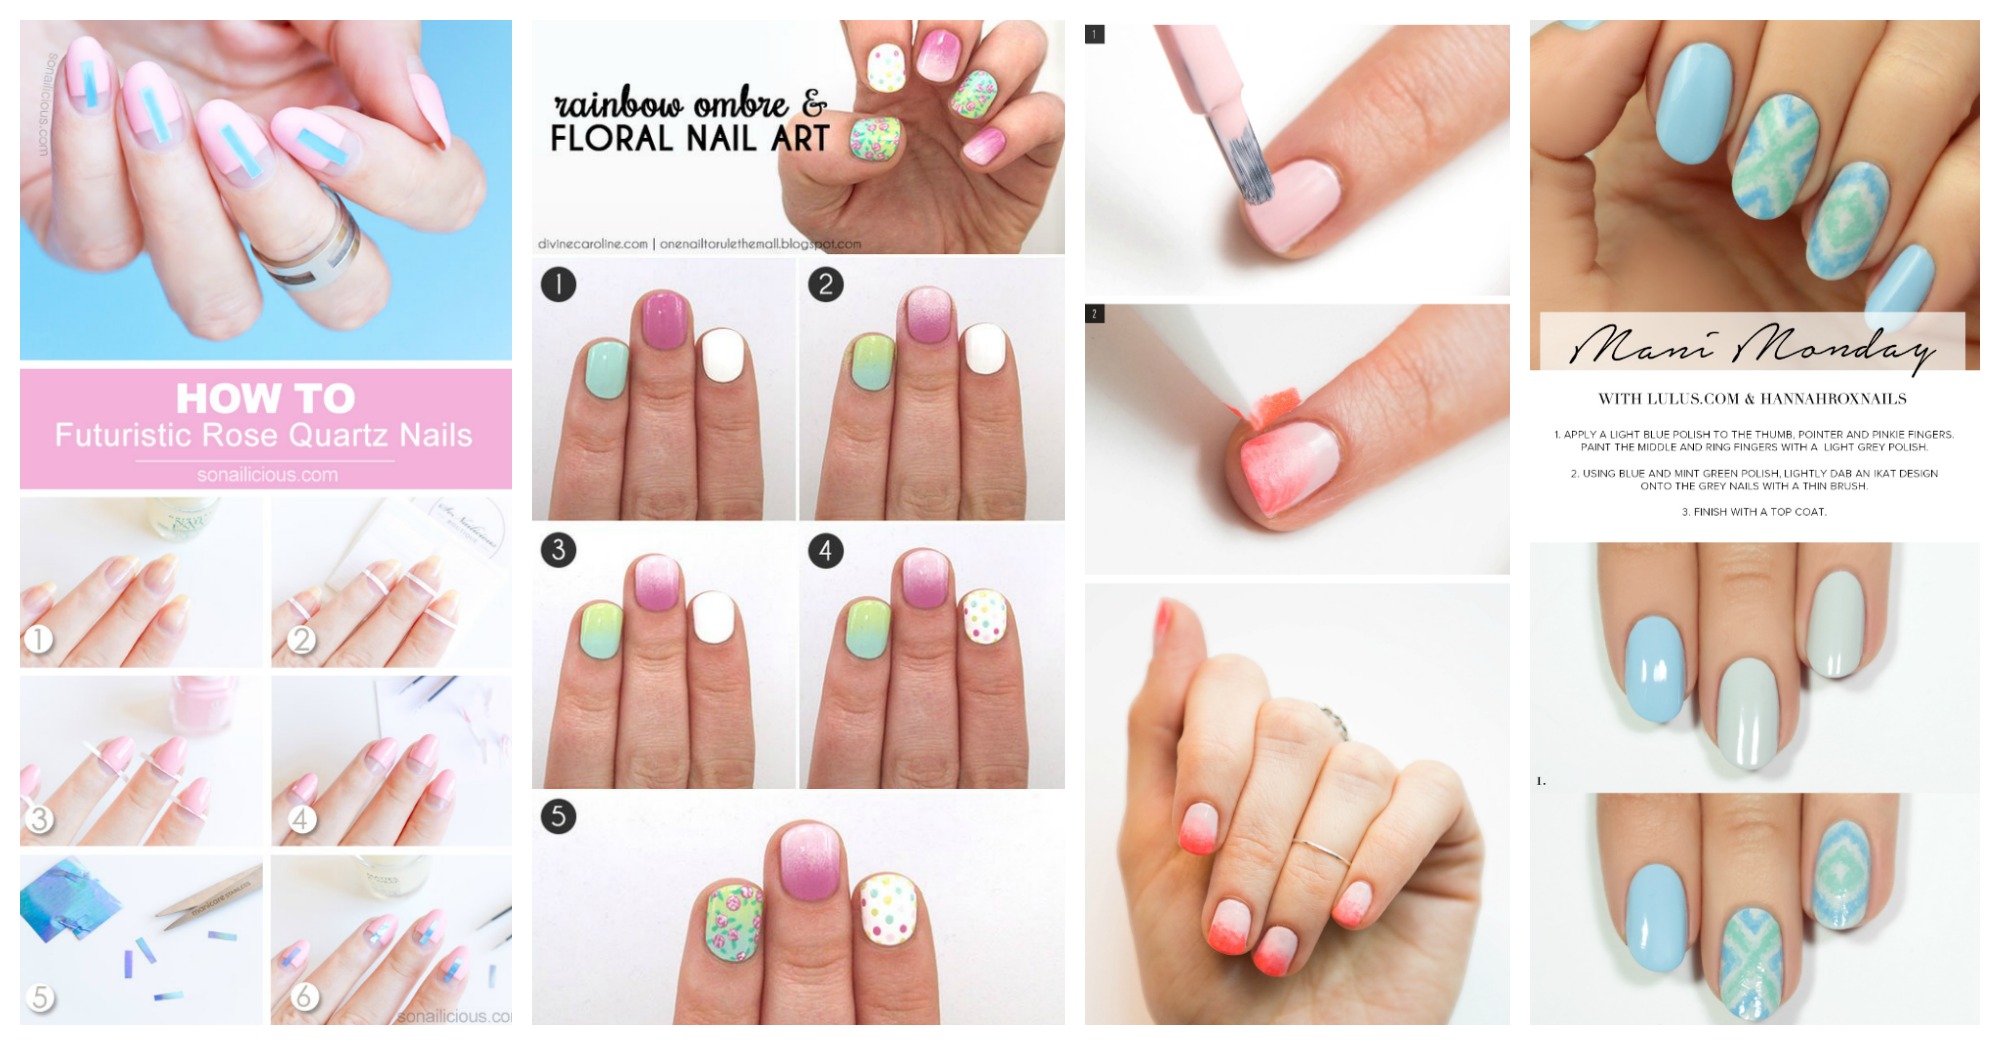 2. Step-by-Step Nail Art Tutorials - wide 6